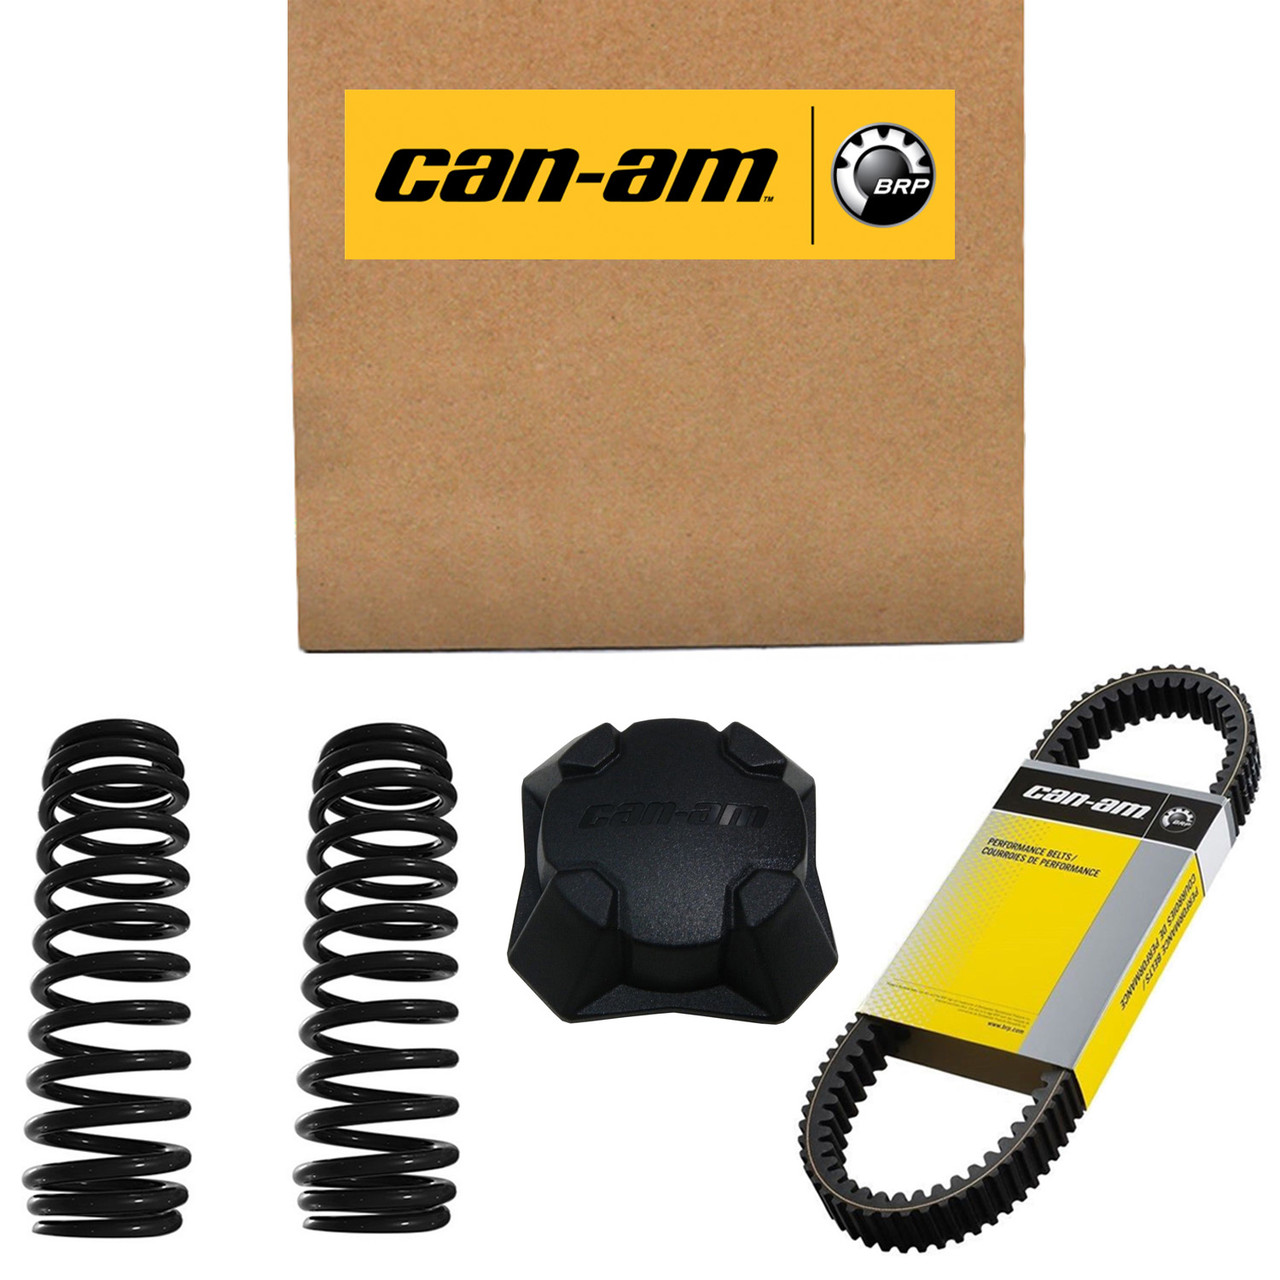 Can-Am New OEM Electronic Box, 420666459